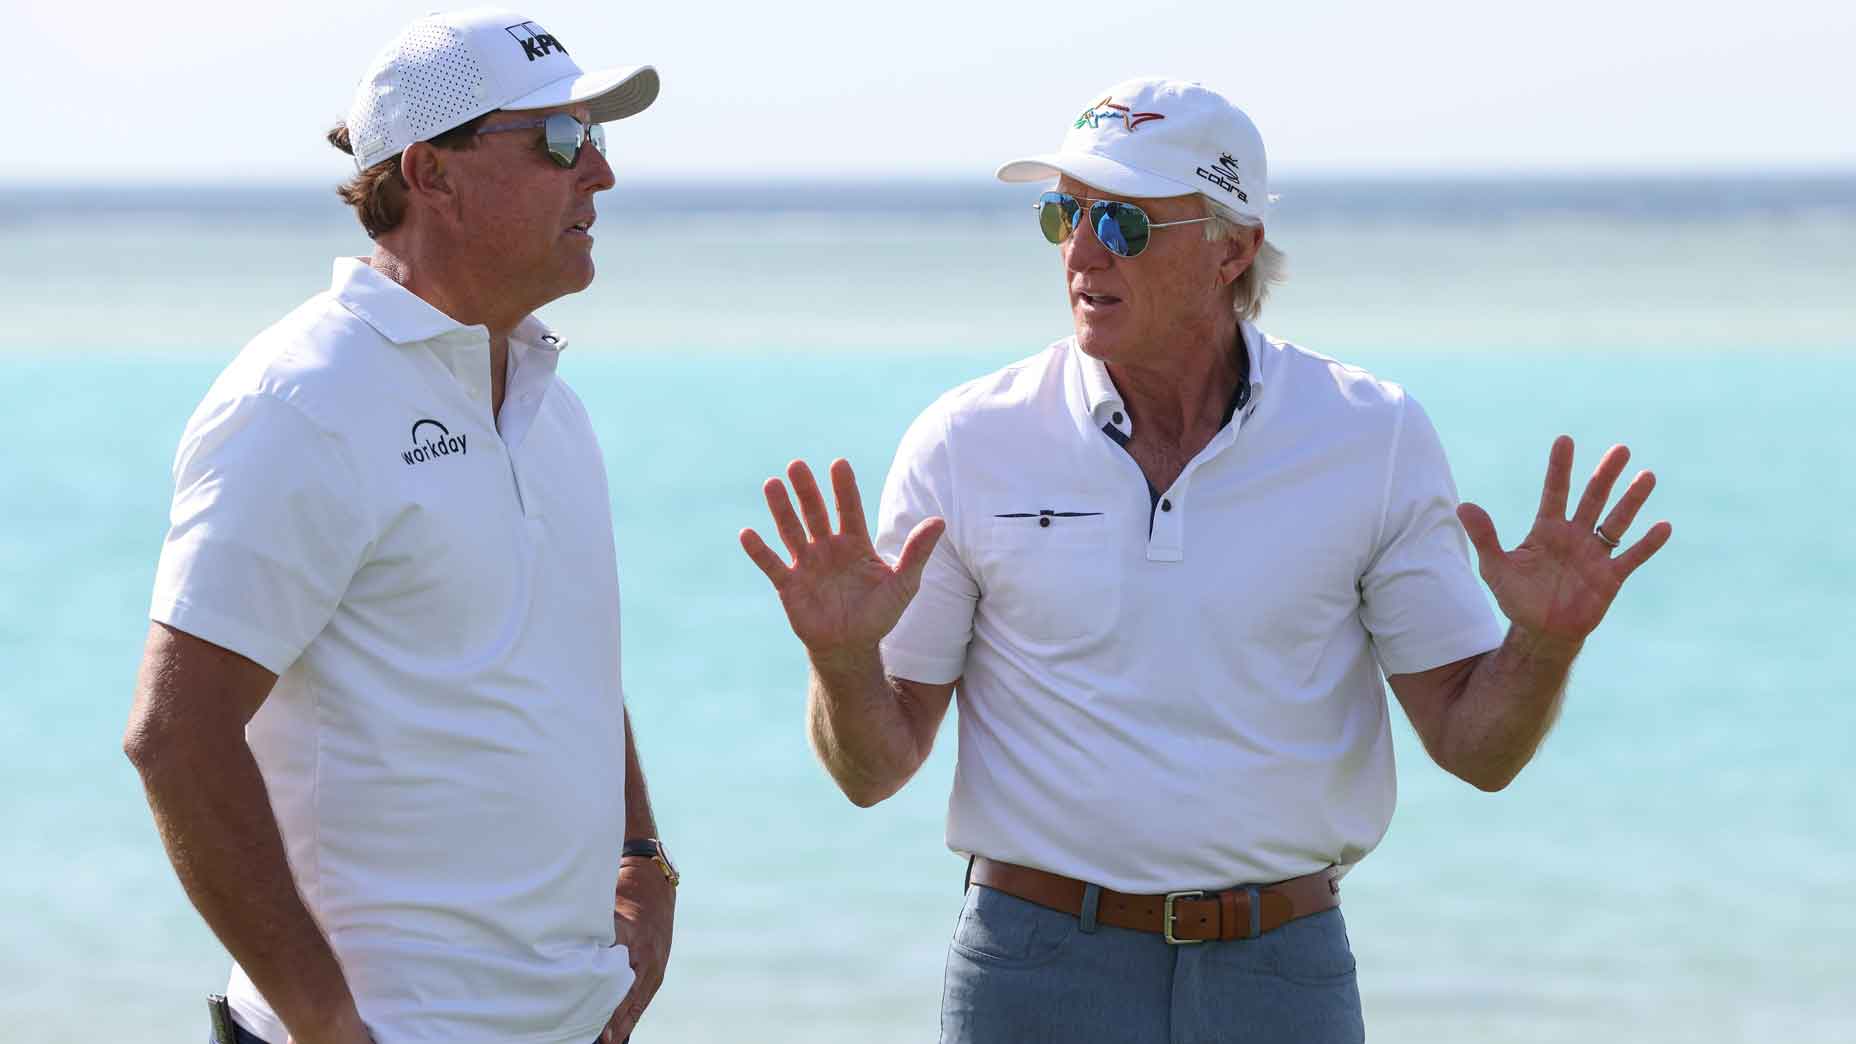 greg norman talks to phil mickelson